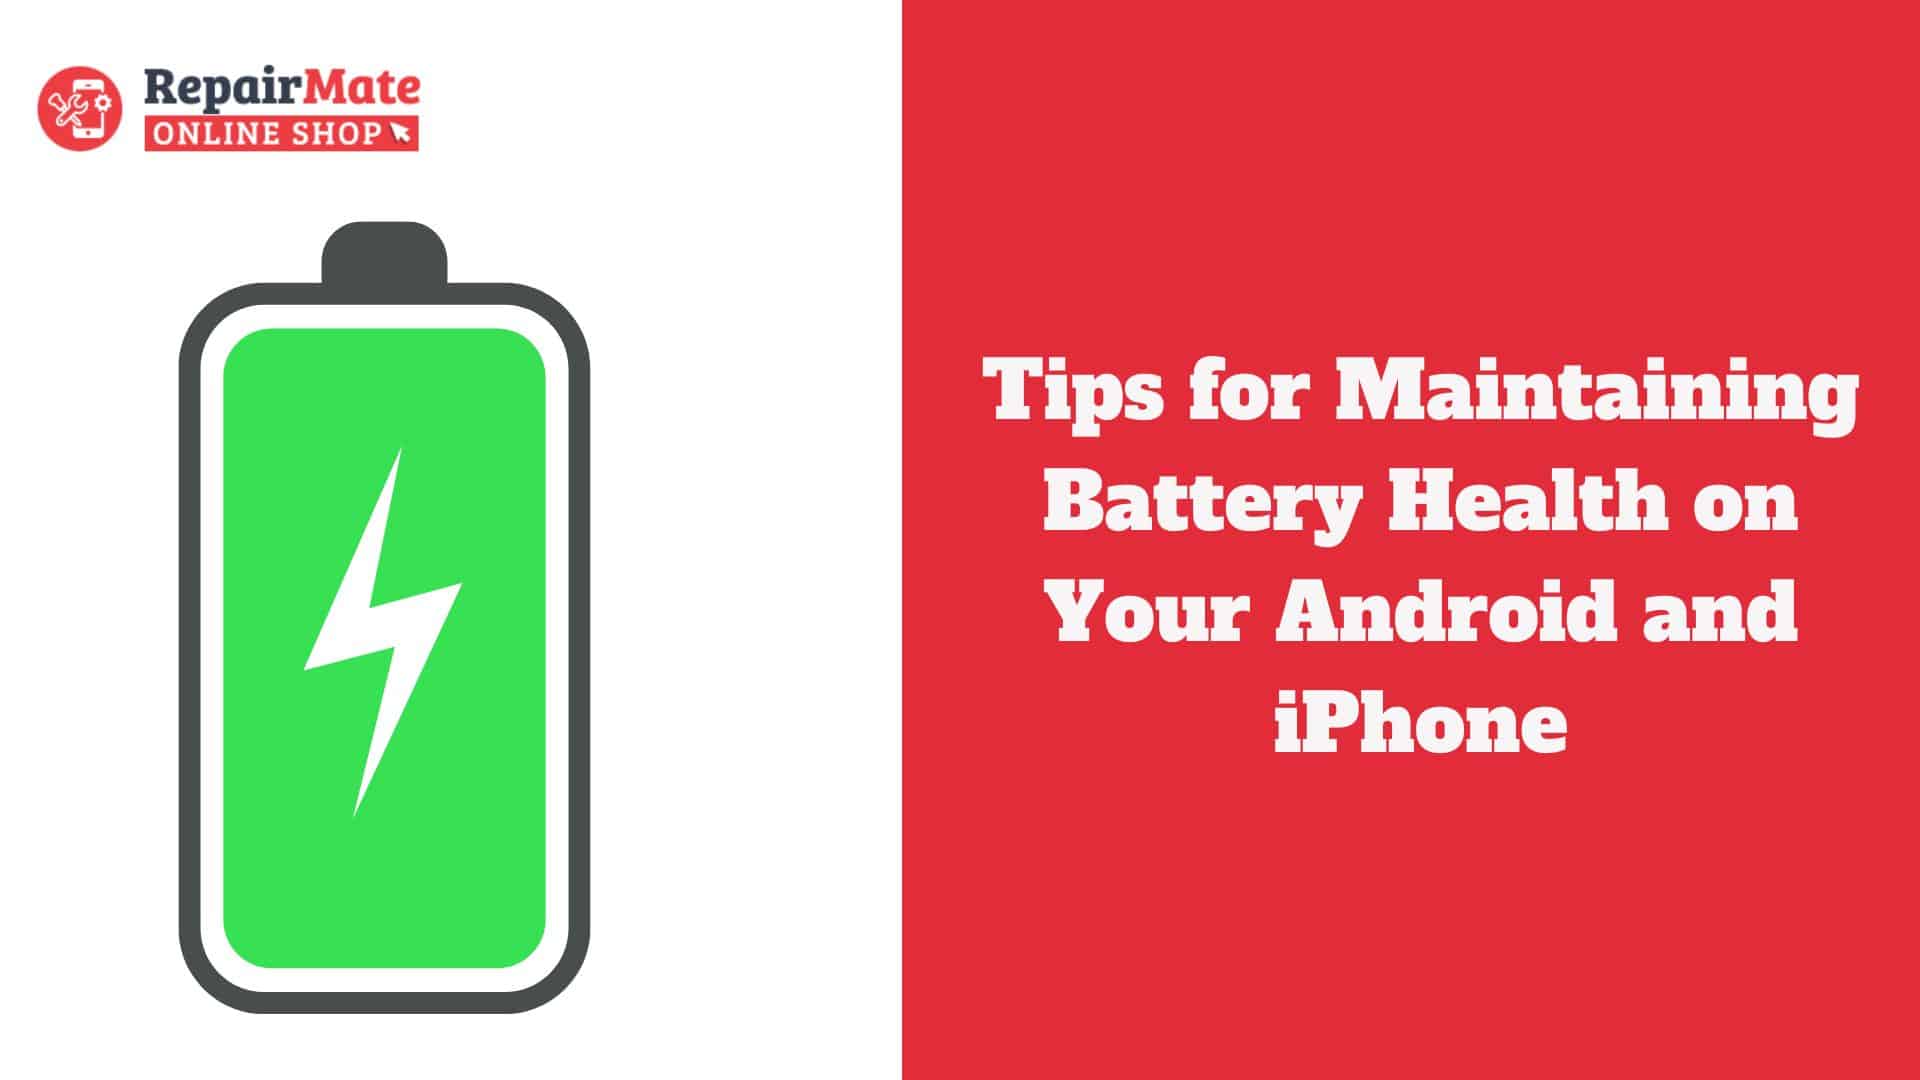 Tips for Maintaining Battery Health on Your Android and iPhone